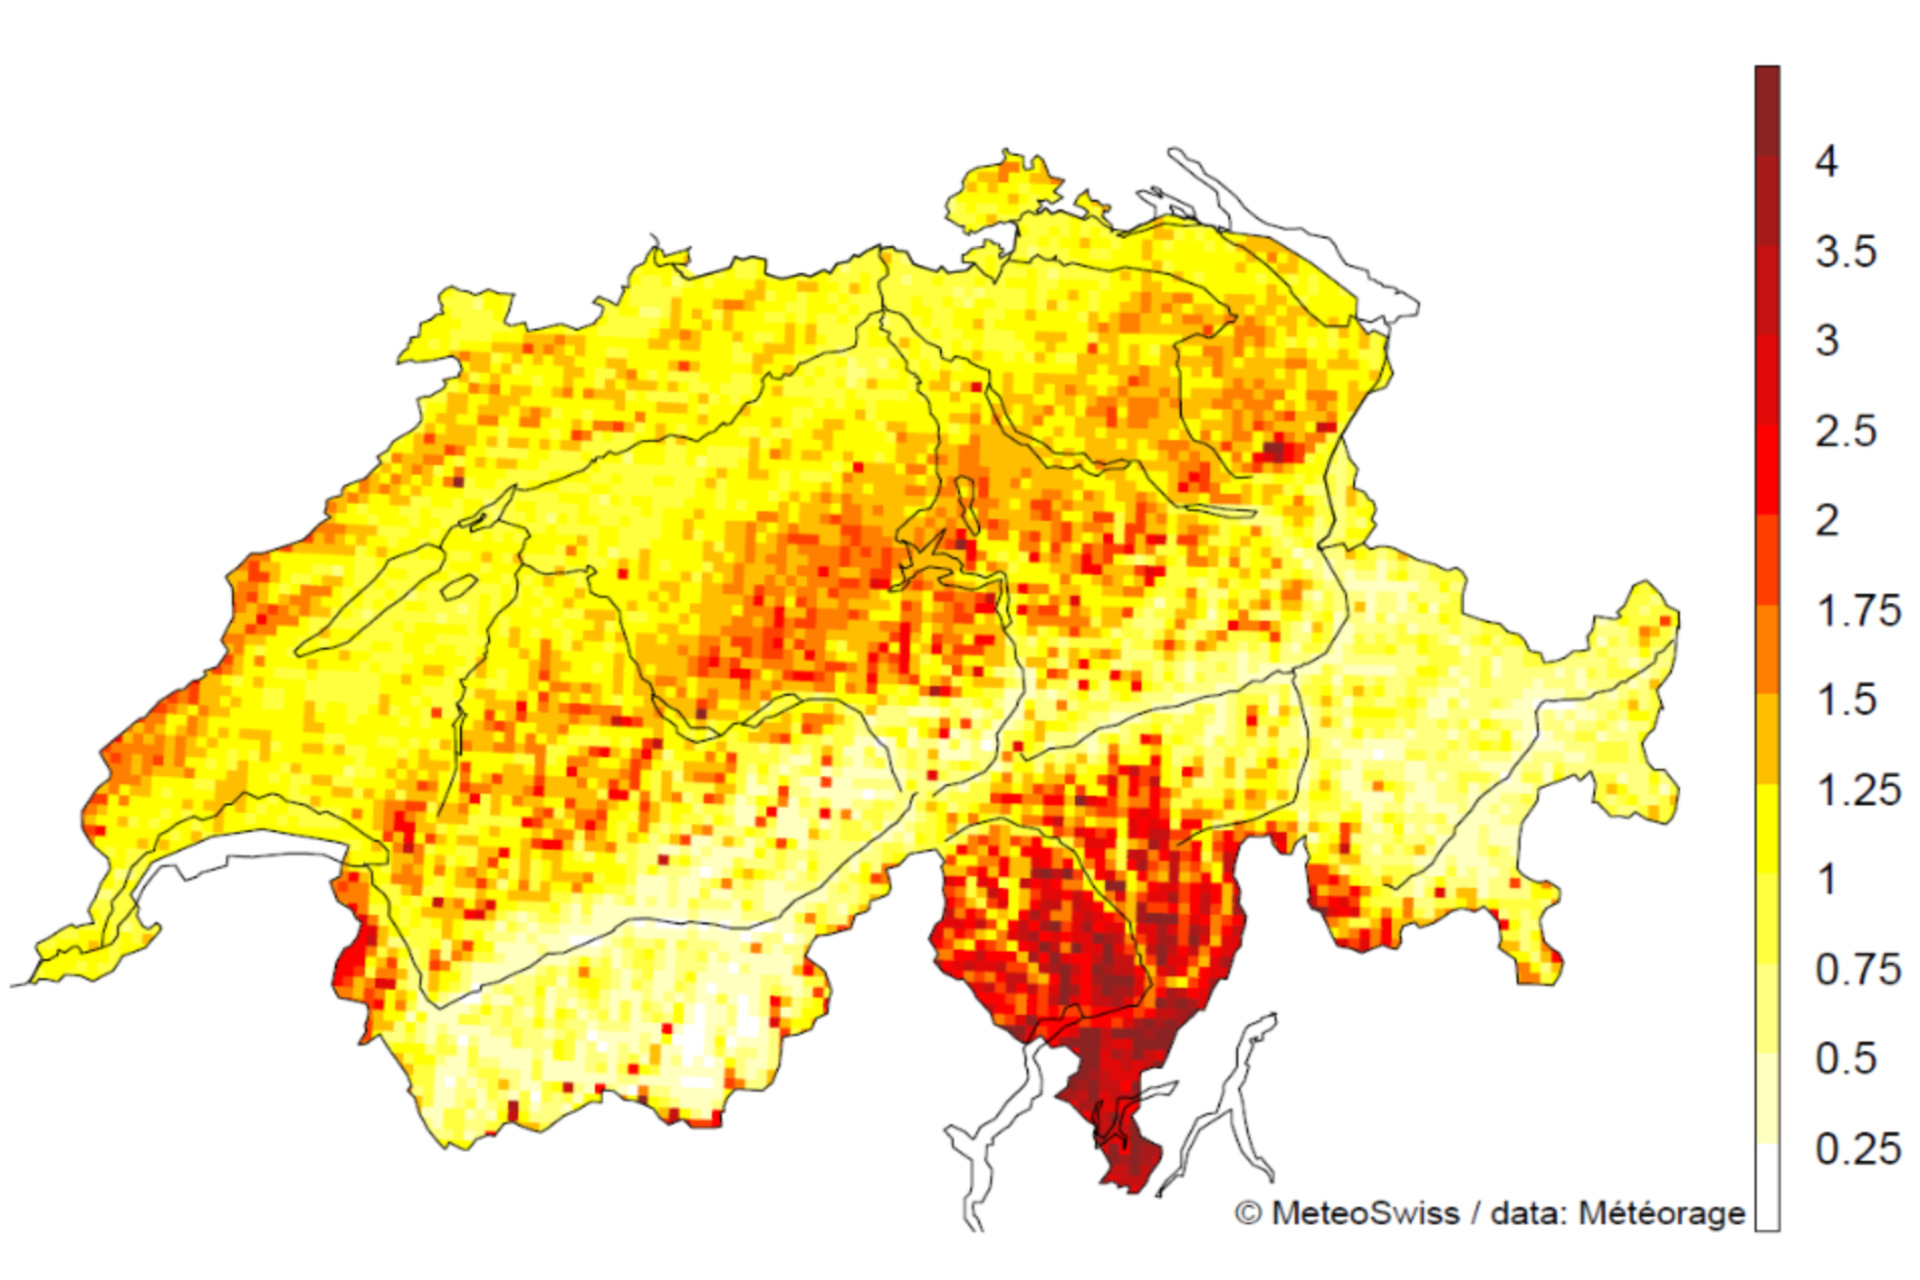 Lightning: the number of lightning strikes per square kilometer in Switzerland in the period 2000-2020, excluding secondary lightning strikes